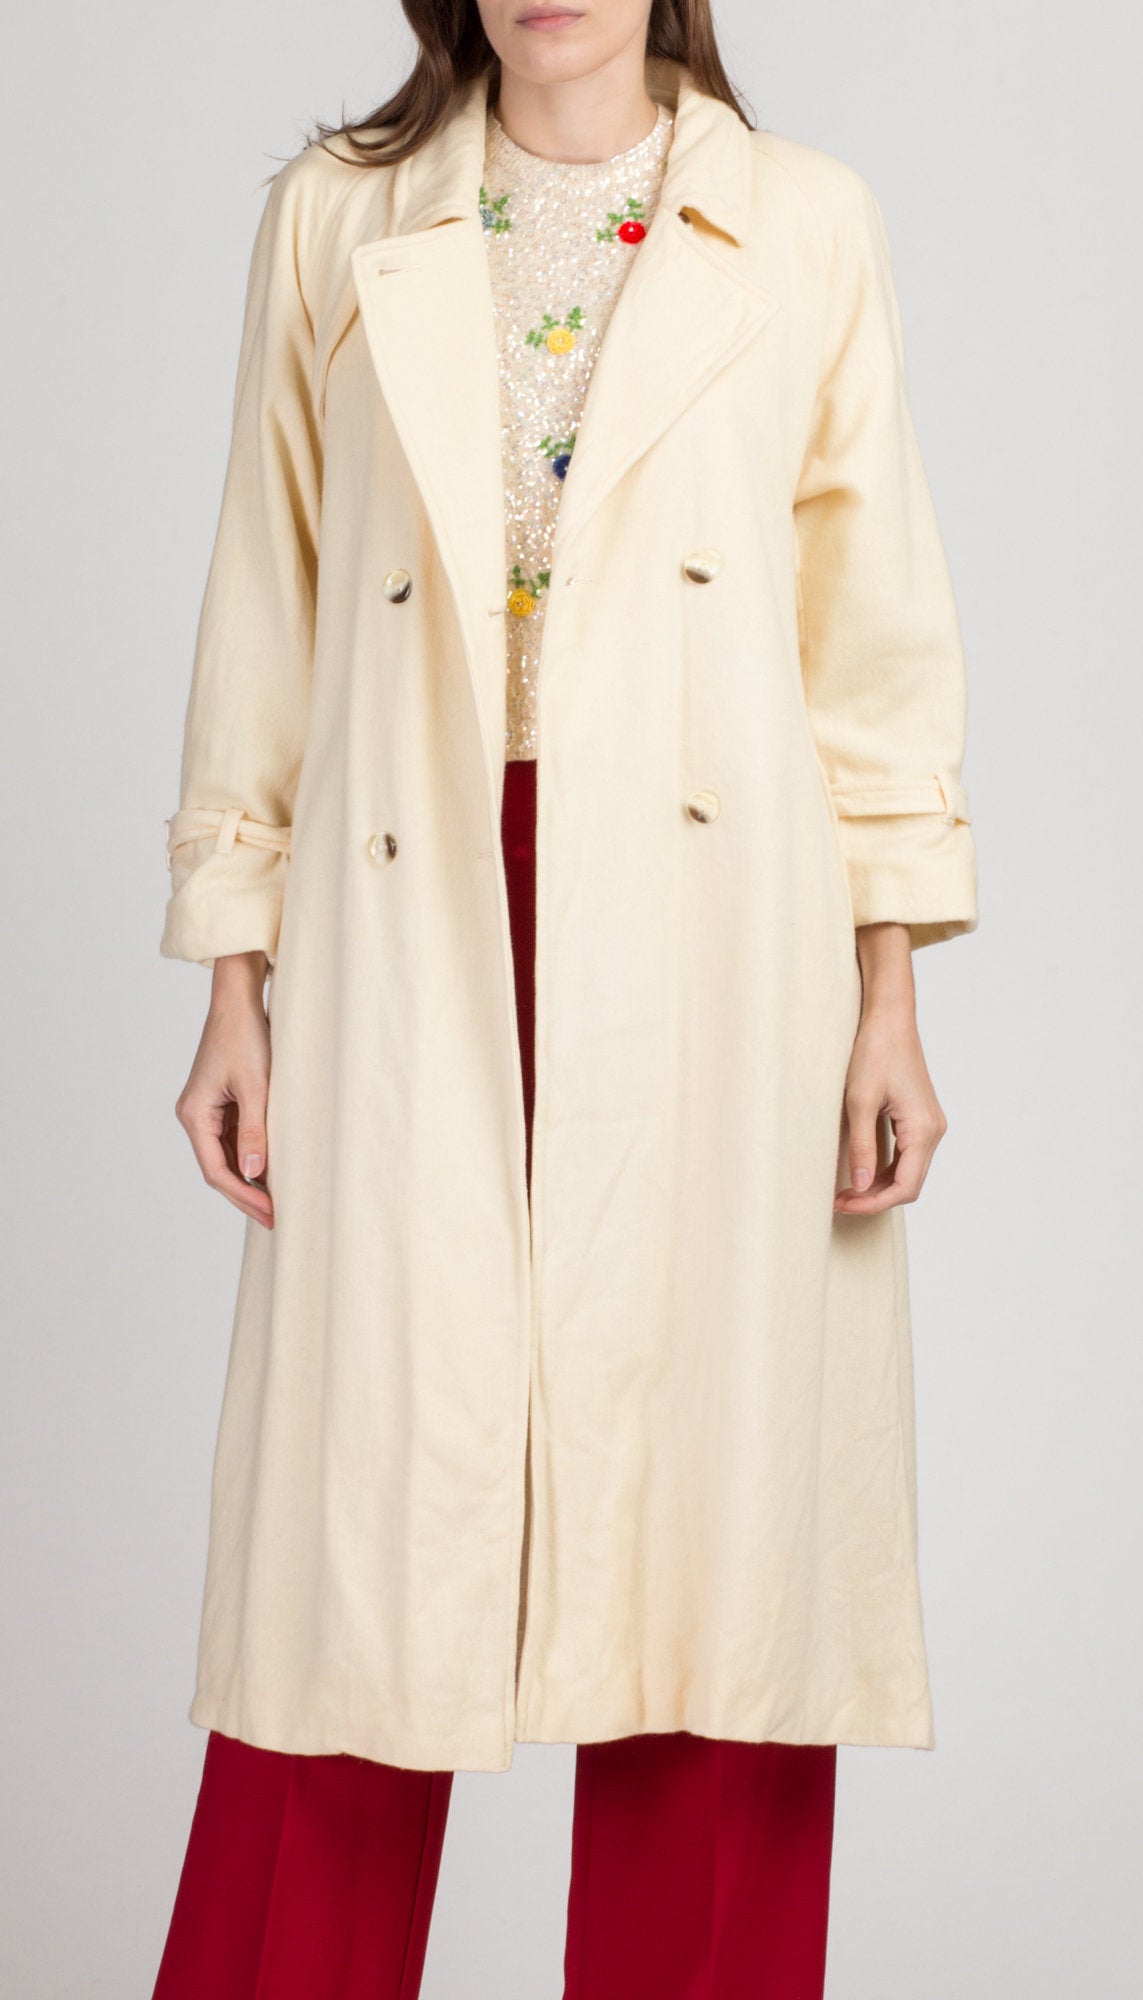 Vintage Cream Wool Belted Overcoat - Large | 80s Minimalist Double Breasted Long Coat